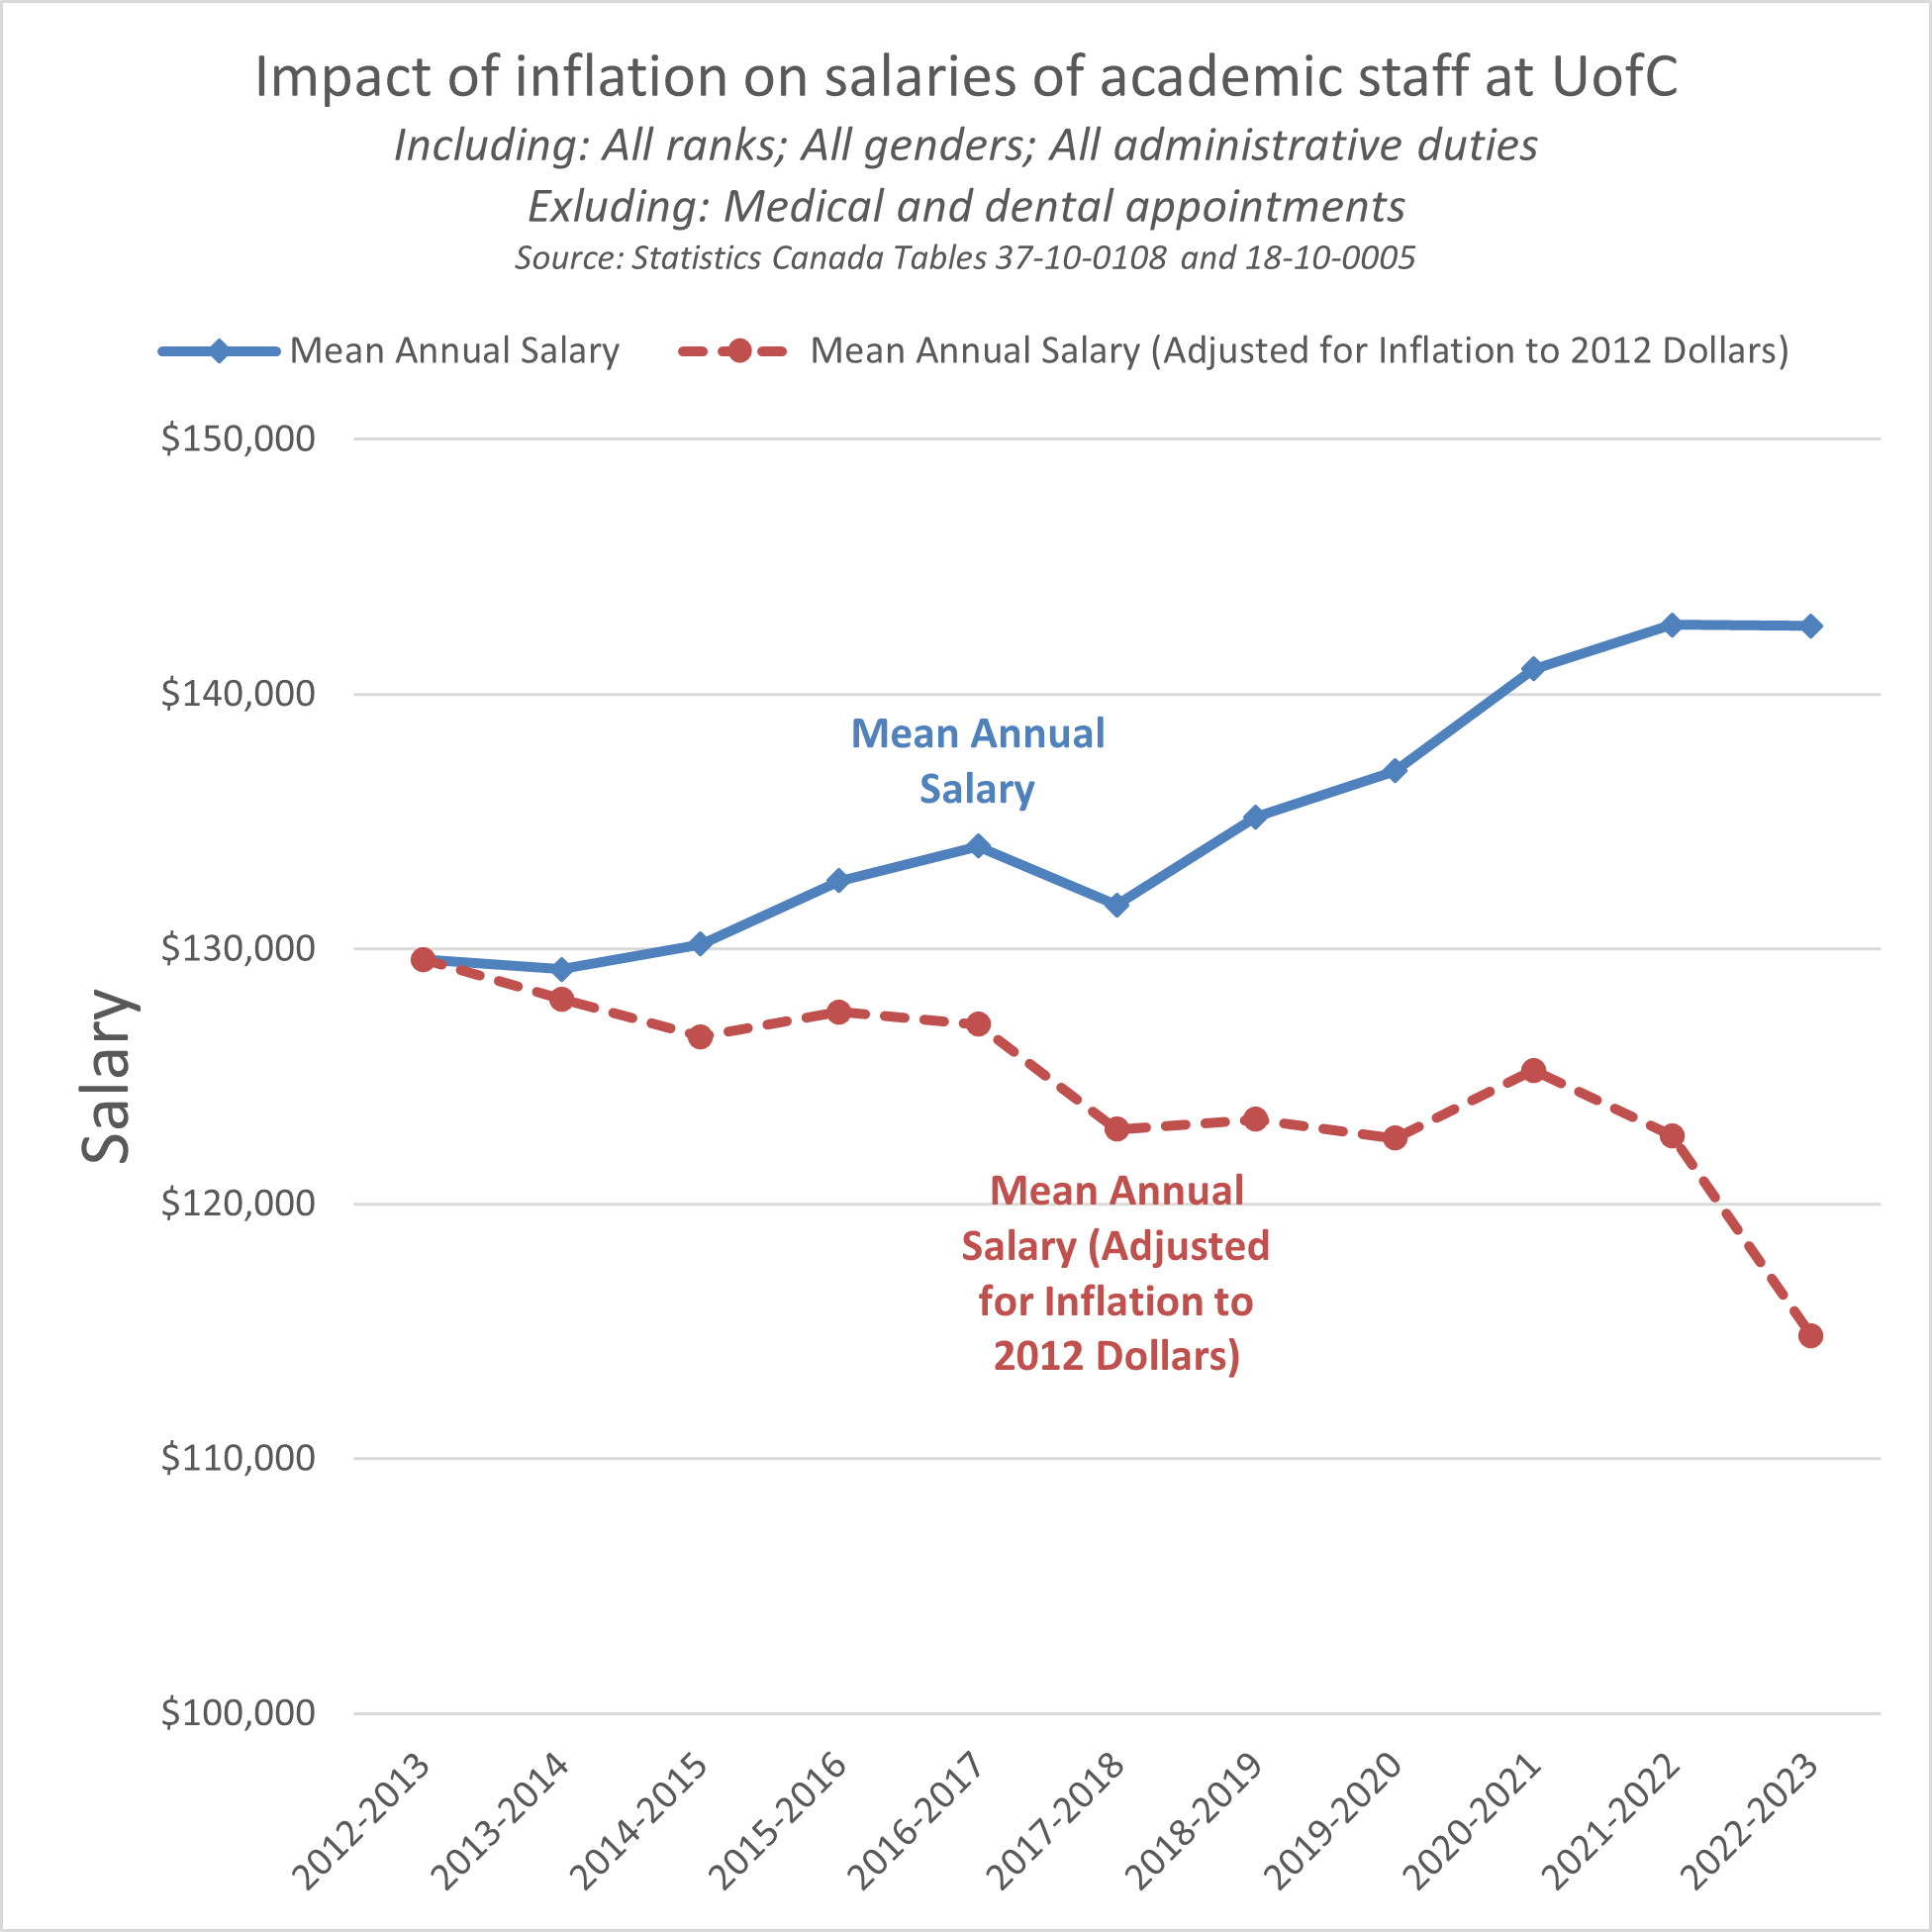 Line chart with two series. First series showing average salaries of full-time academic staff at University of Calgary between 2012-2013 and 2022-2023. Second series showing the same average salaries adjusted for inflation relative to 2012. 